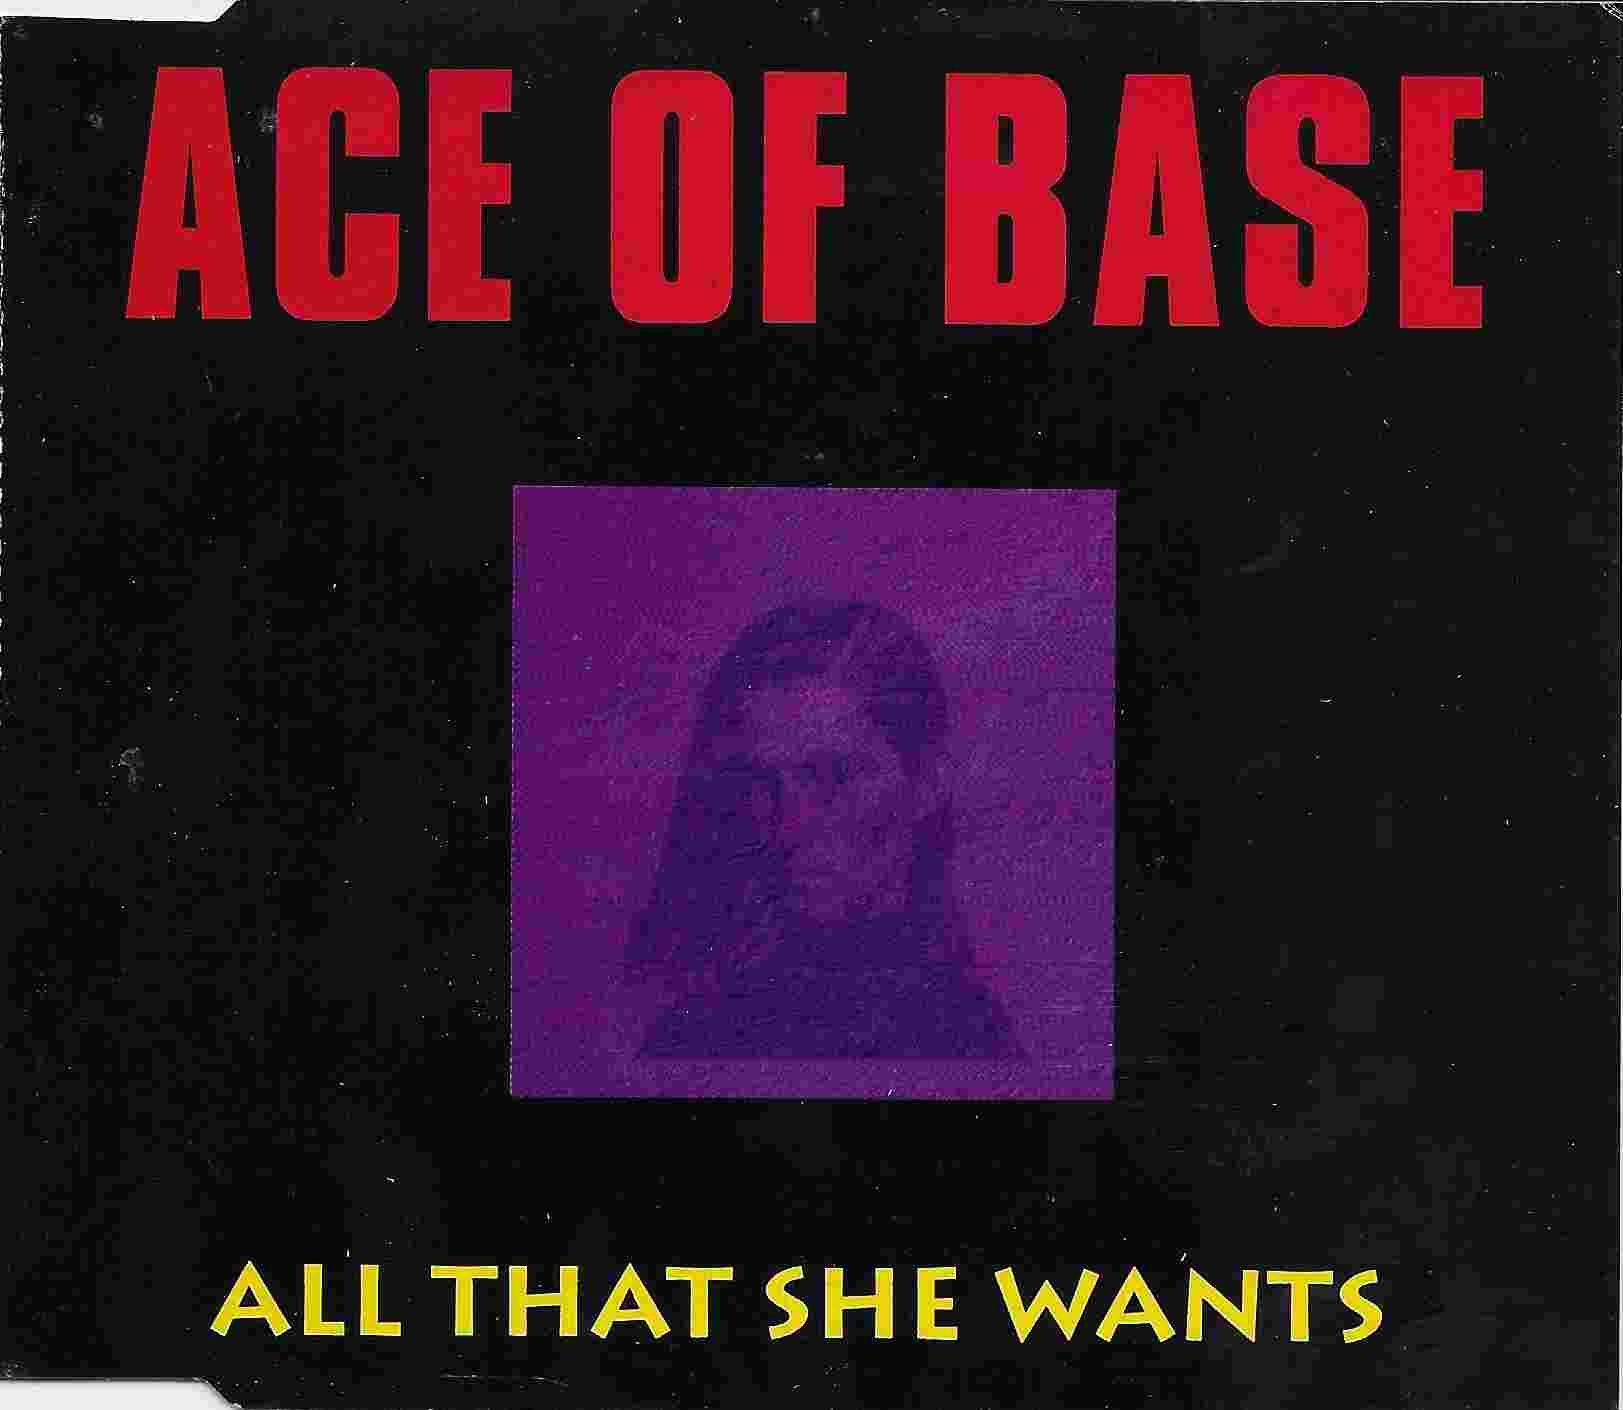 Picture of 862 271 - 2 All that she wants by artist Ace of base 